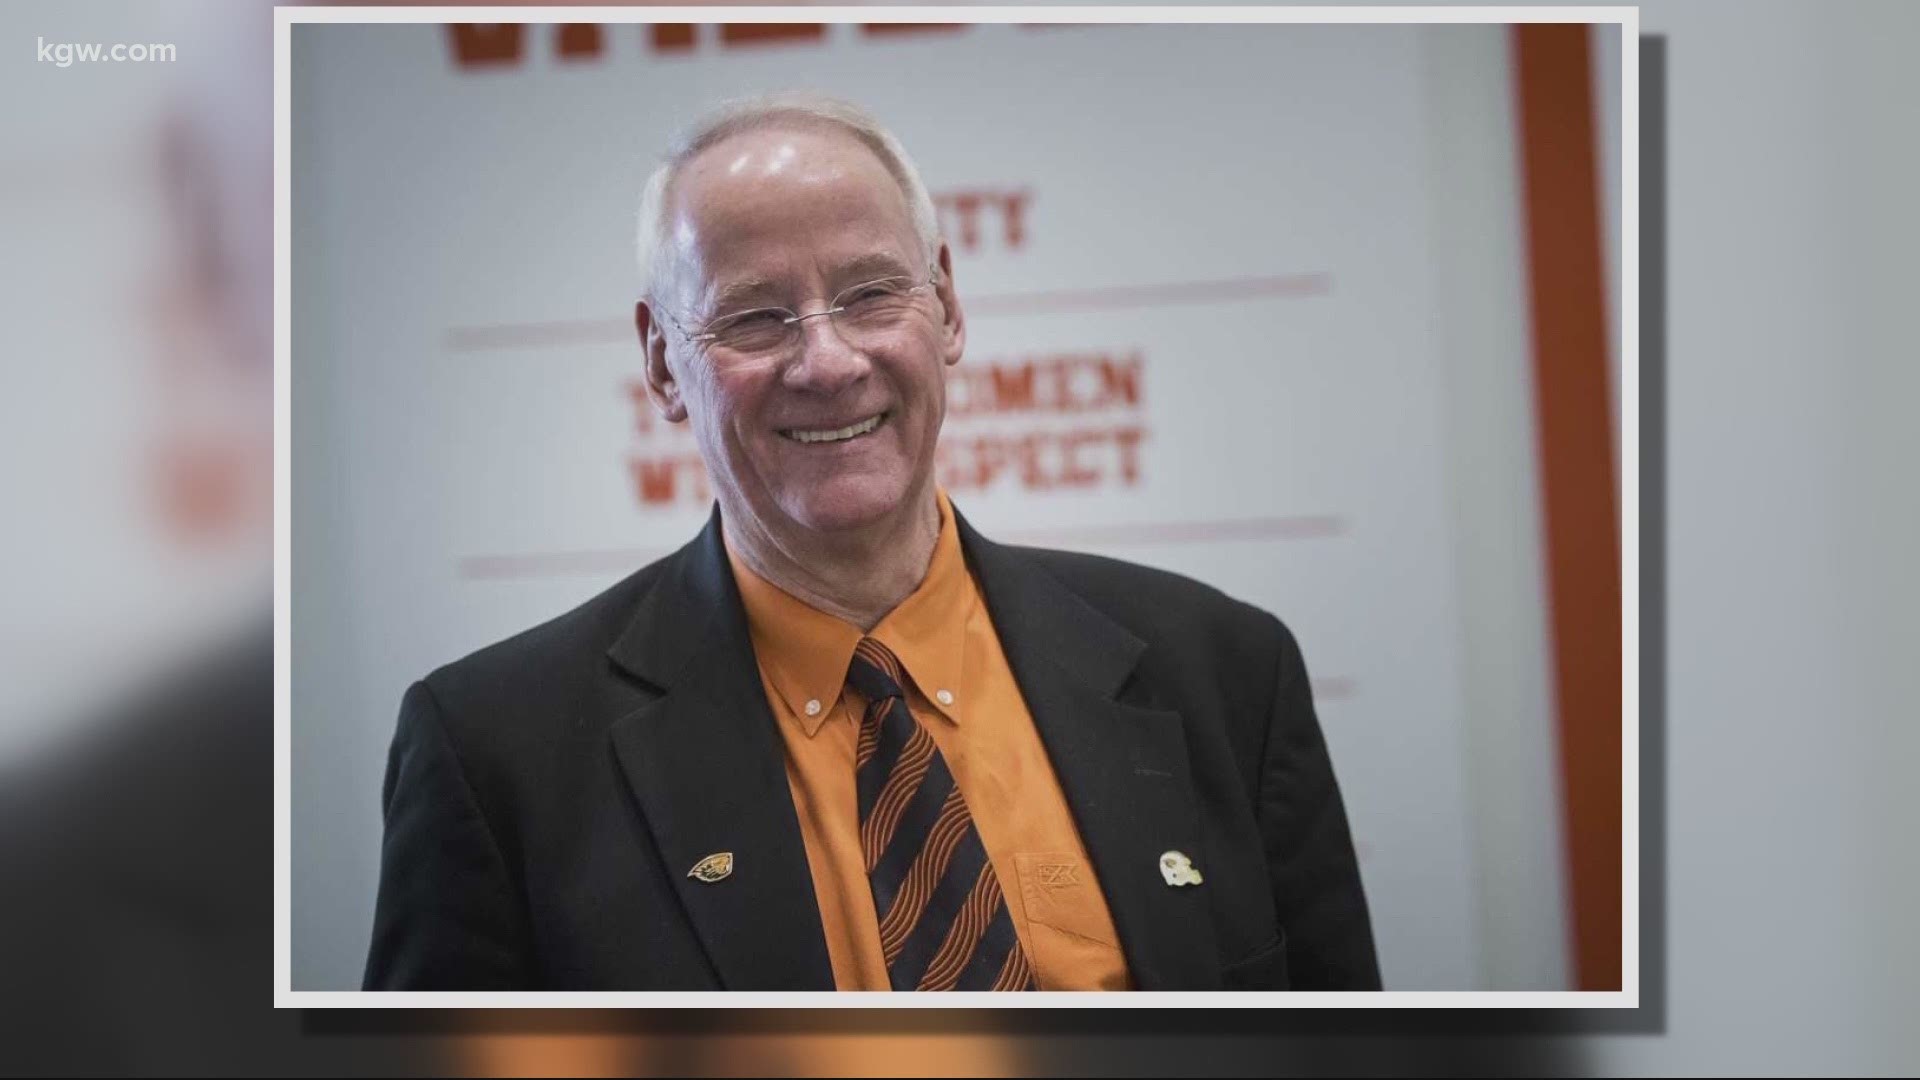 Oregon State University has a new president for the first time in nearly 20 years after Ed Ray recently retired.